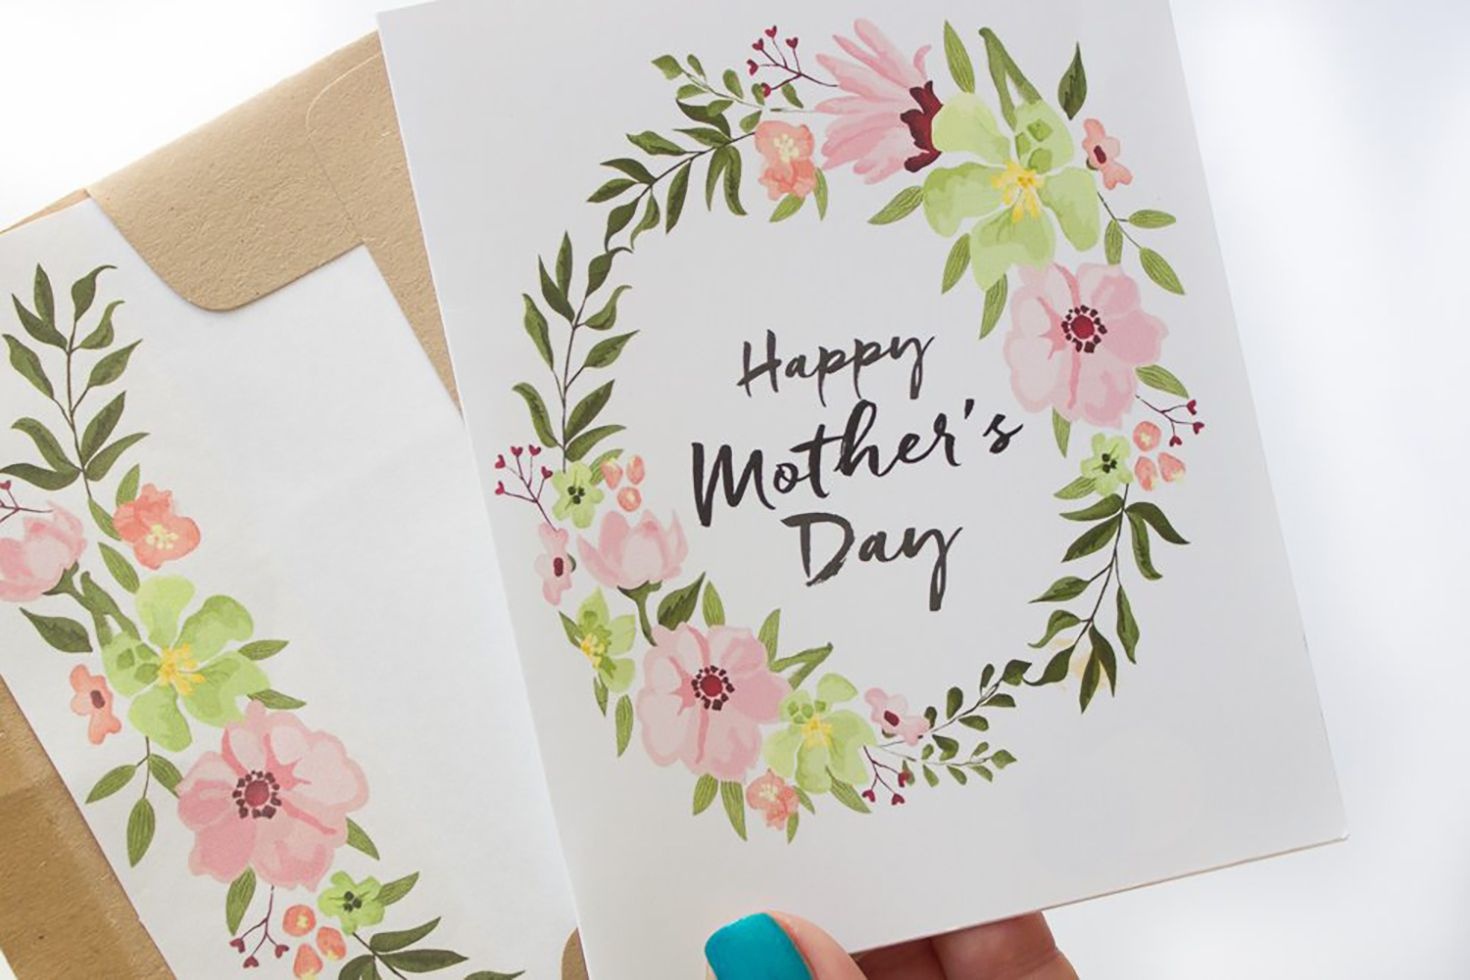 23 Mothers Day Cards - Free Printable Mother&amp;#039;s Day Cards - Free Printable Mothers Day Cards To My Wife